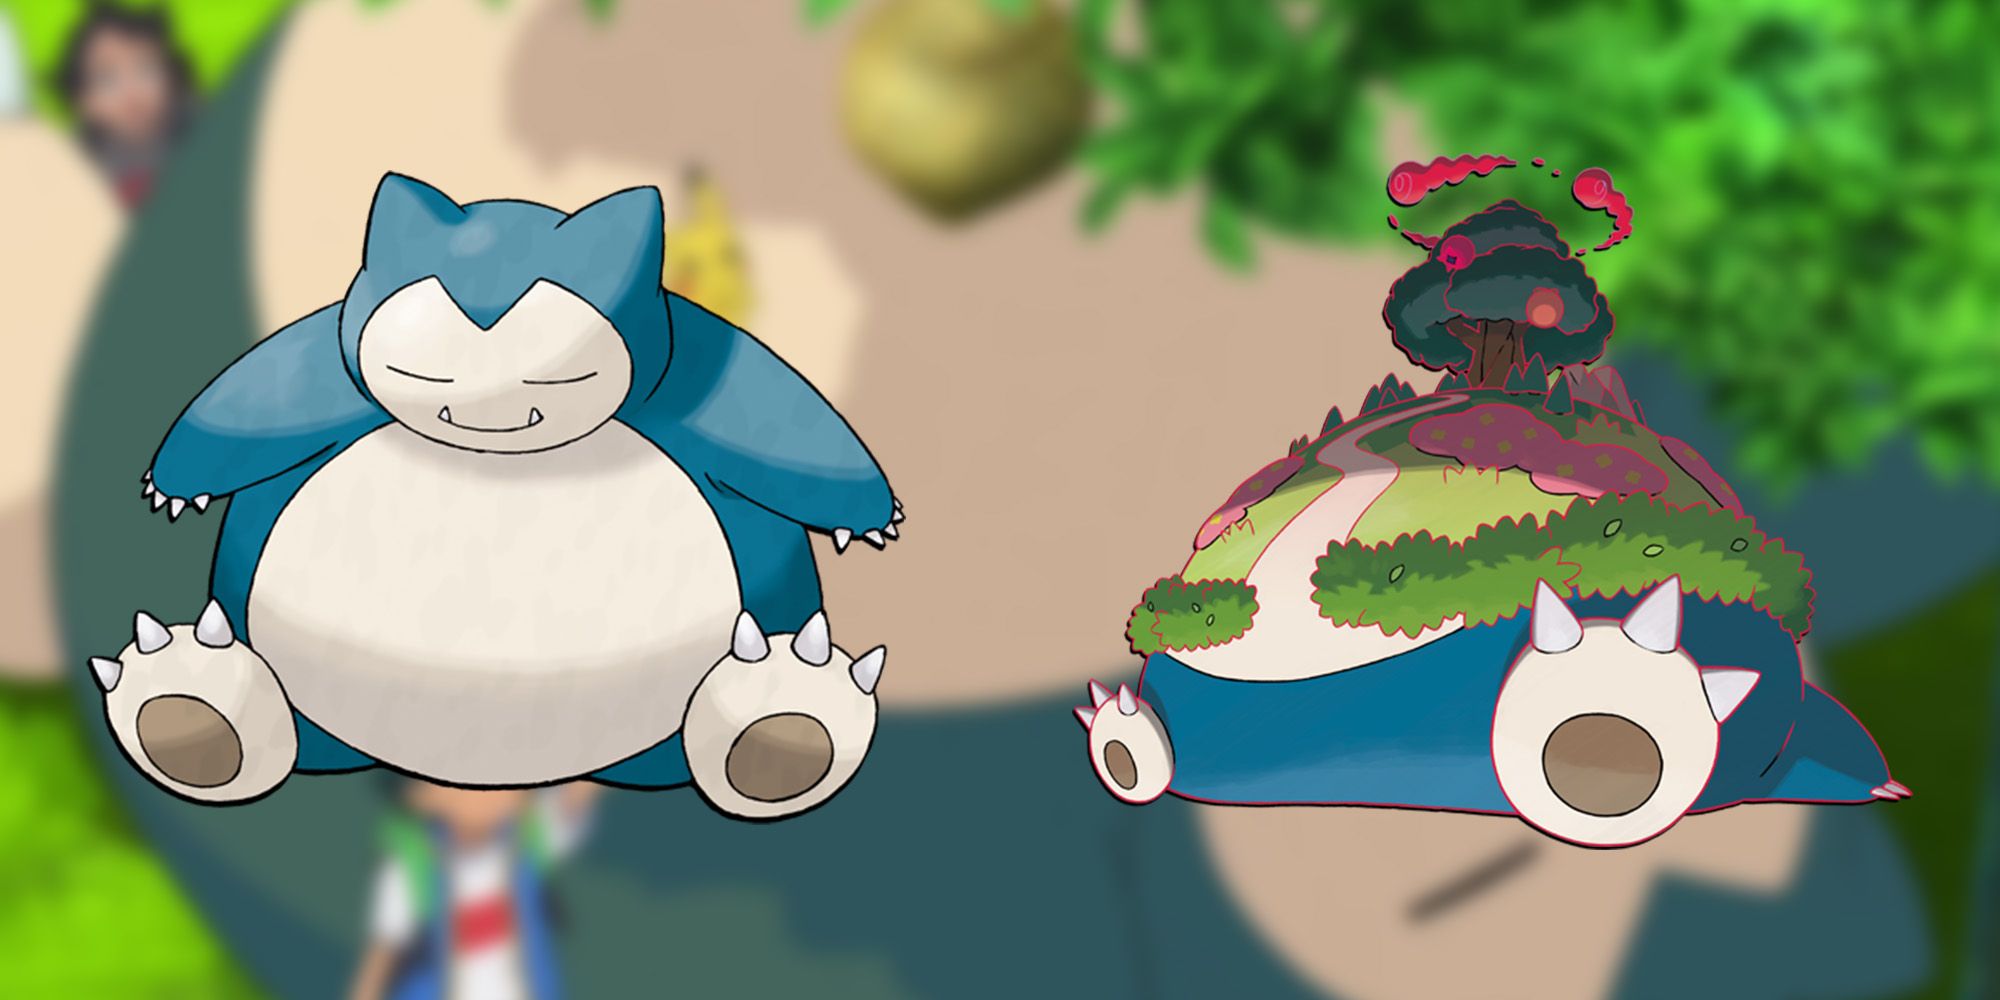 Pokemon - PNGs of Snorlax and Gigantamax Snorlax over image of Snorlax in anime